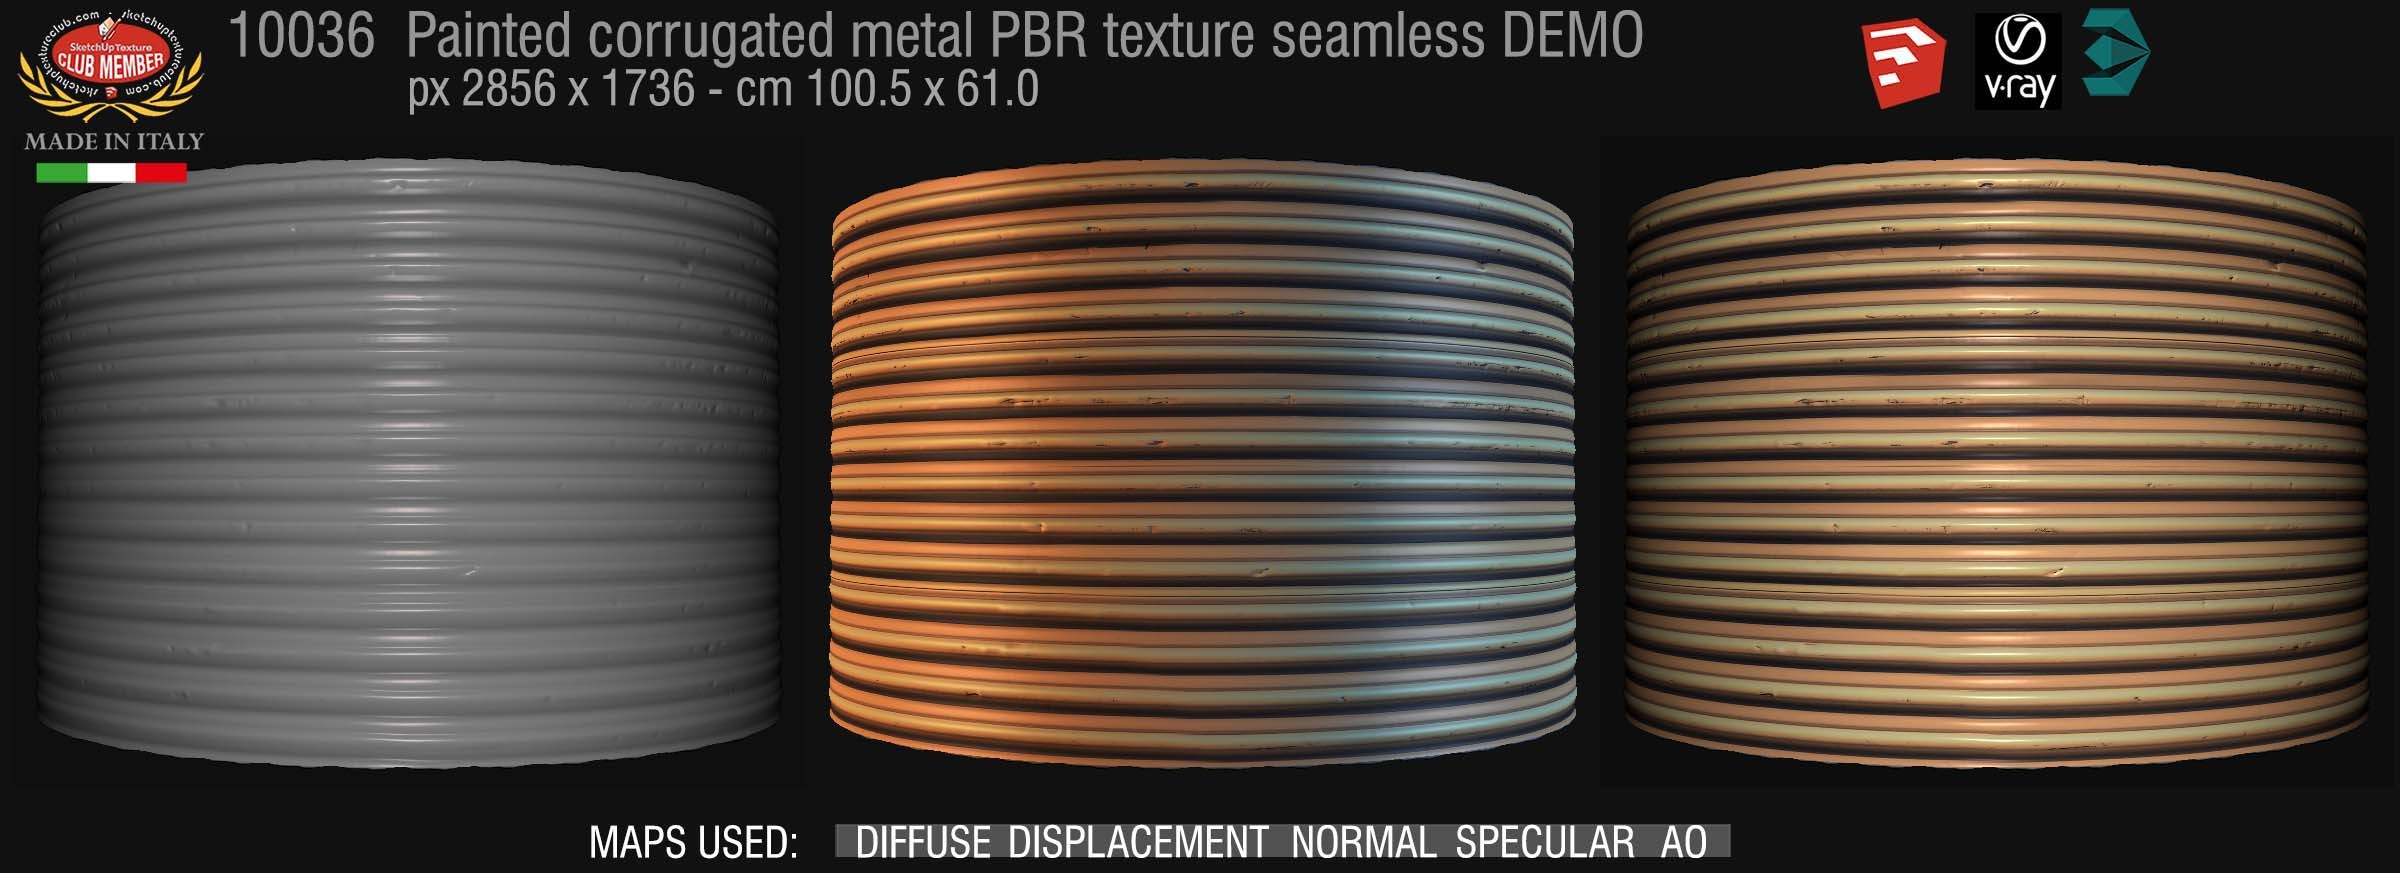 10036 Painted corrugated metal PBR texture seamless DEMO